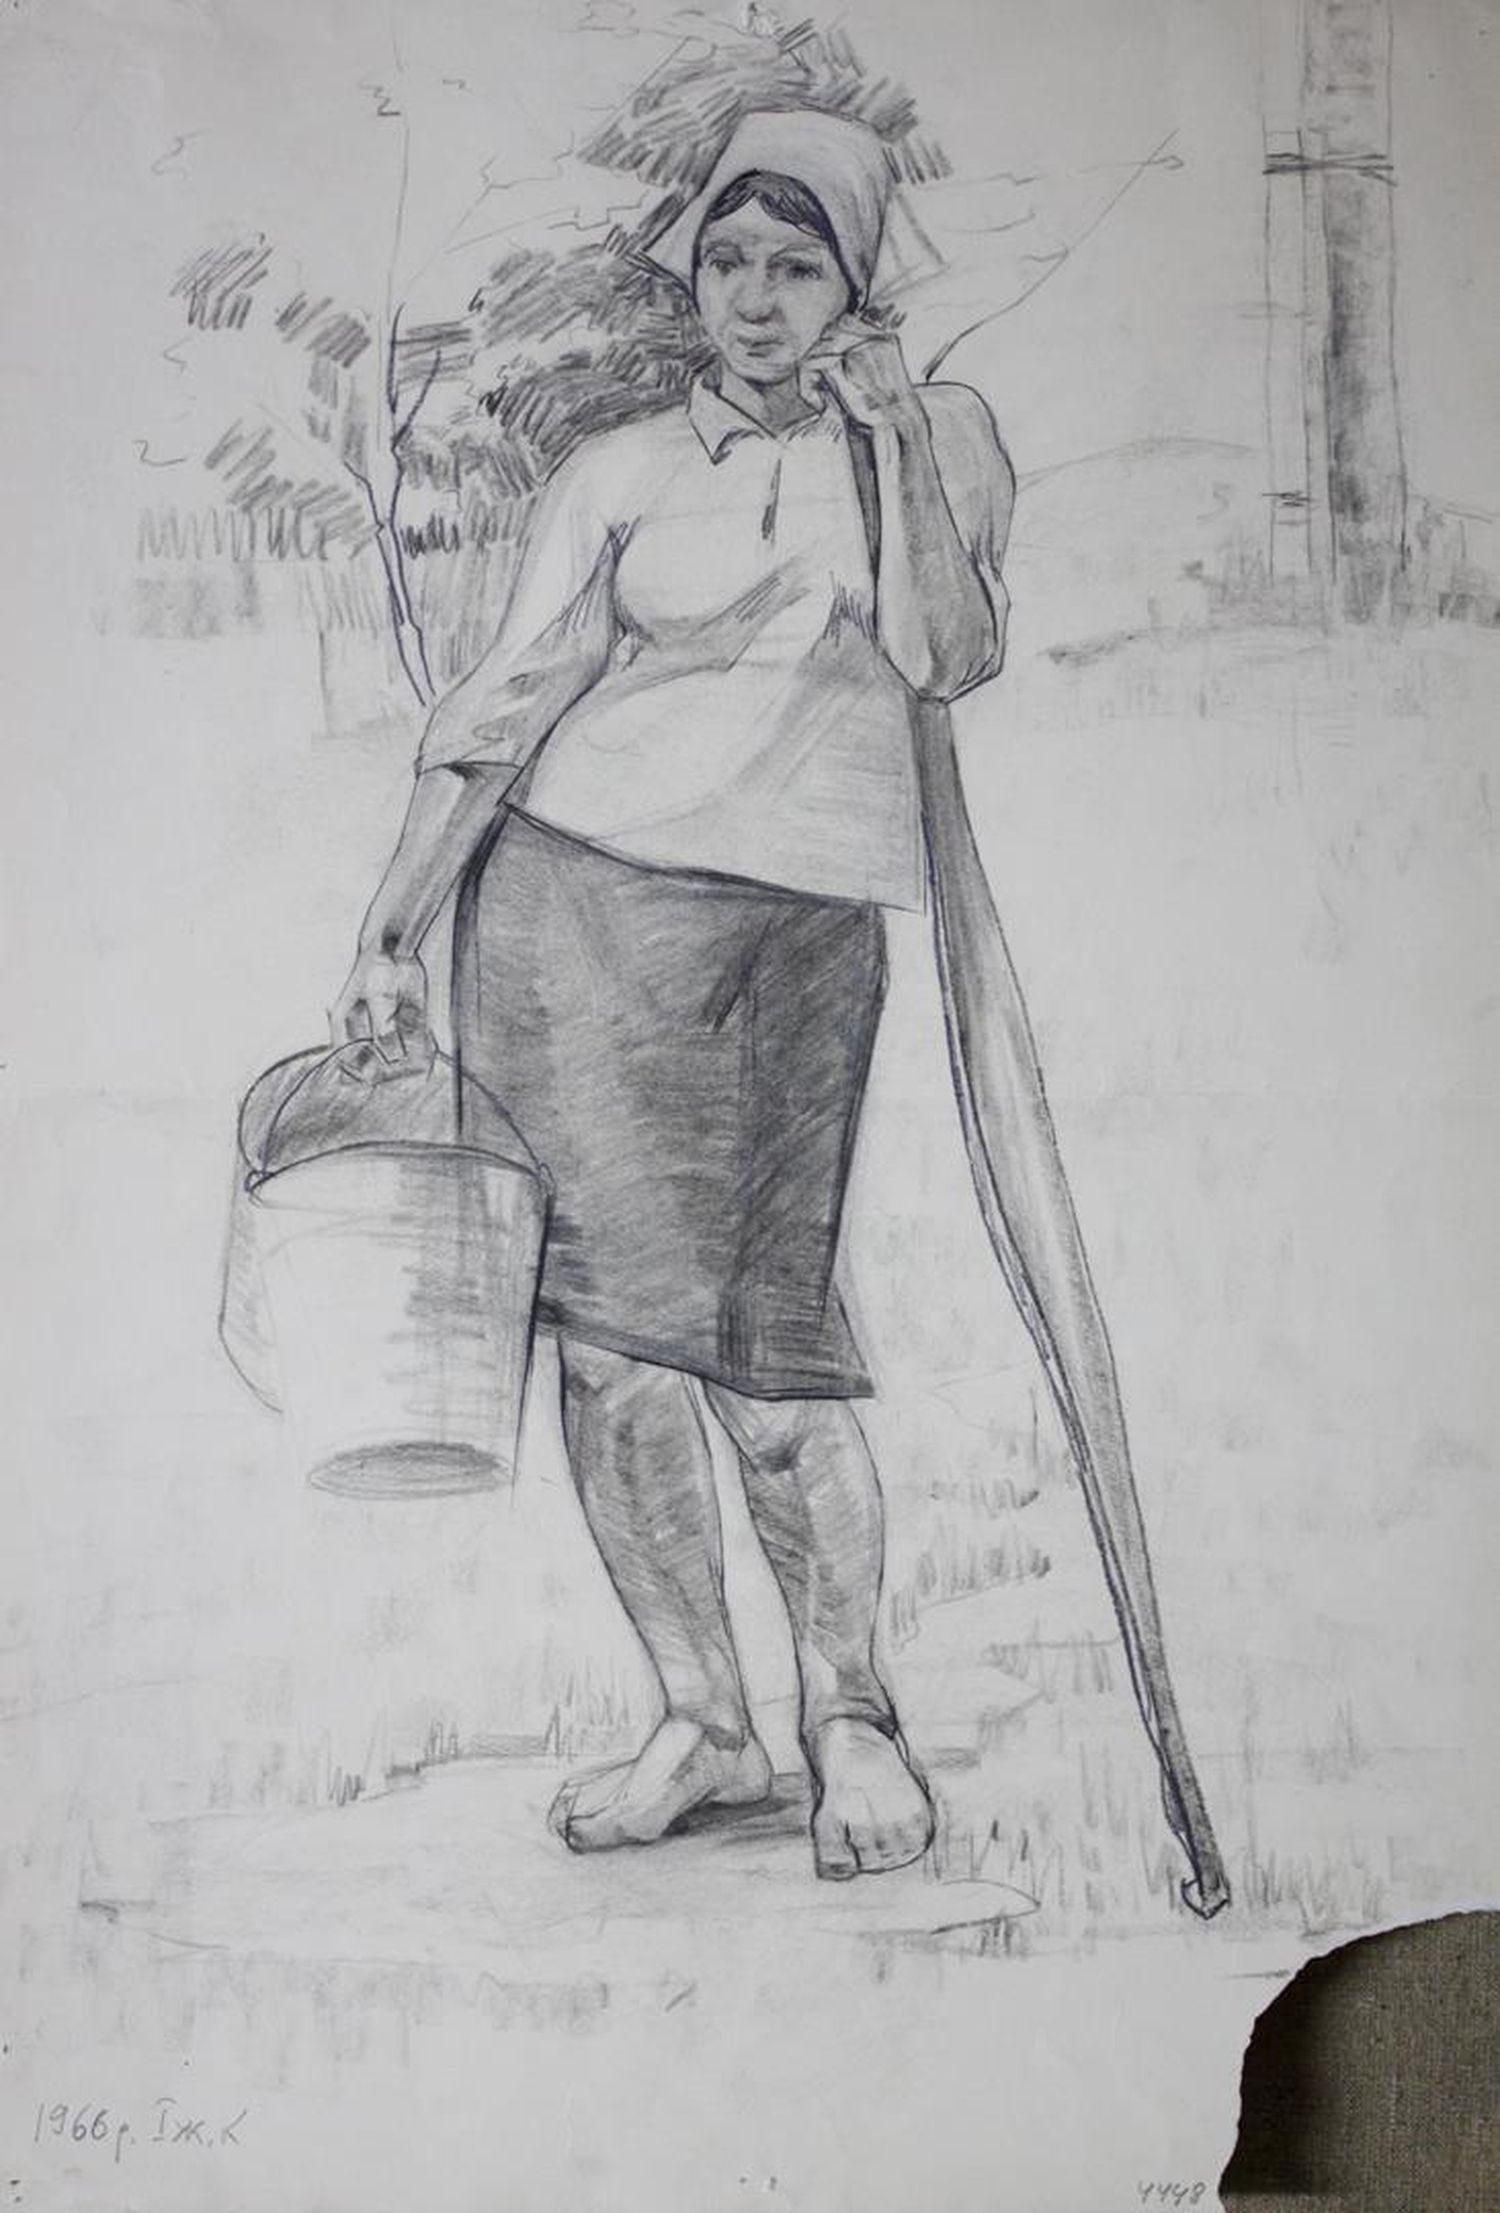 "The girl with a bucket and a yoke"